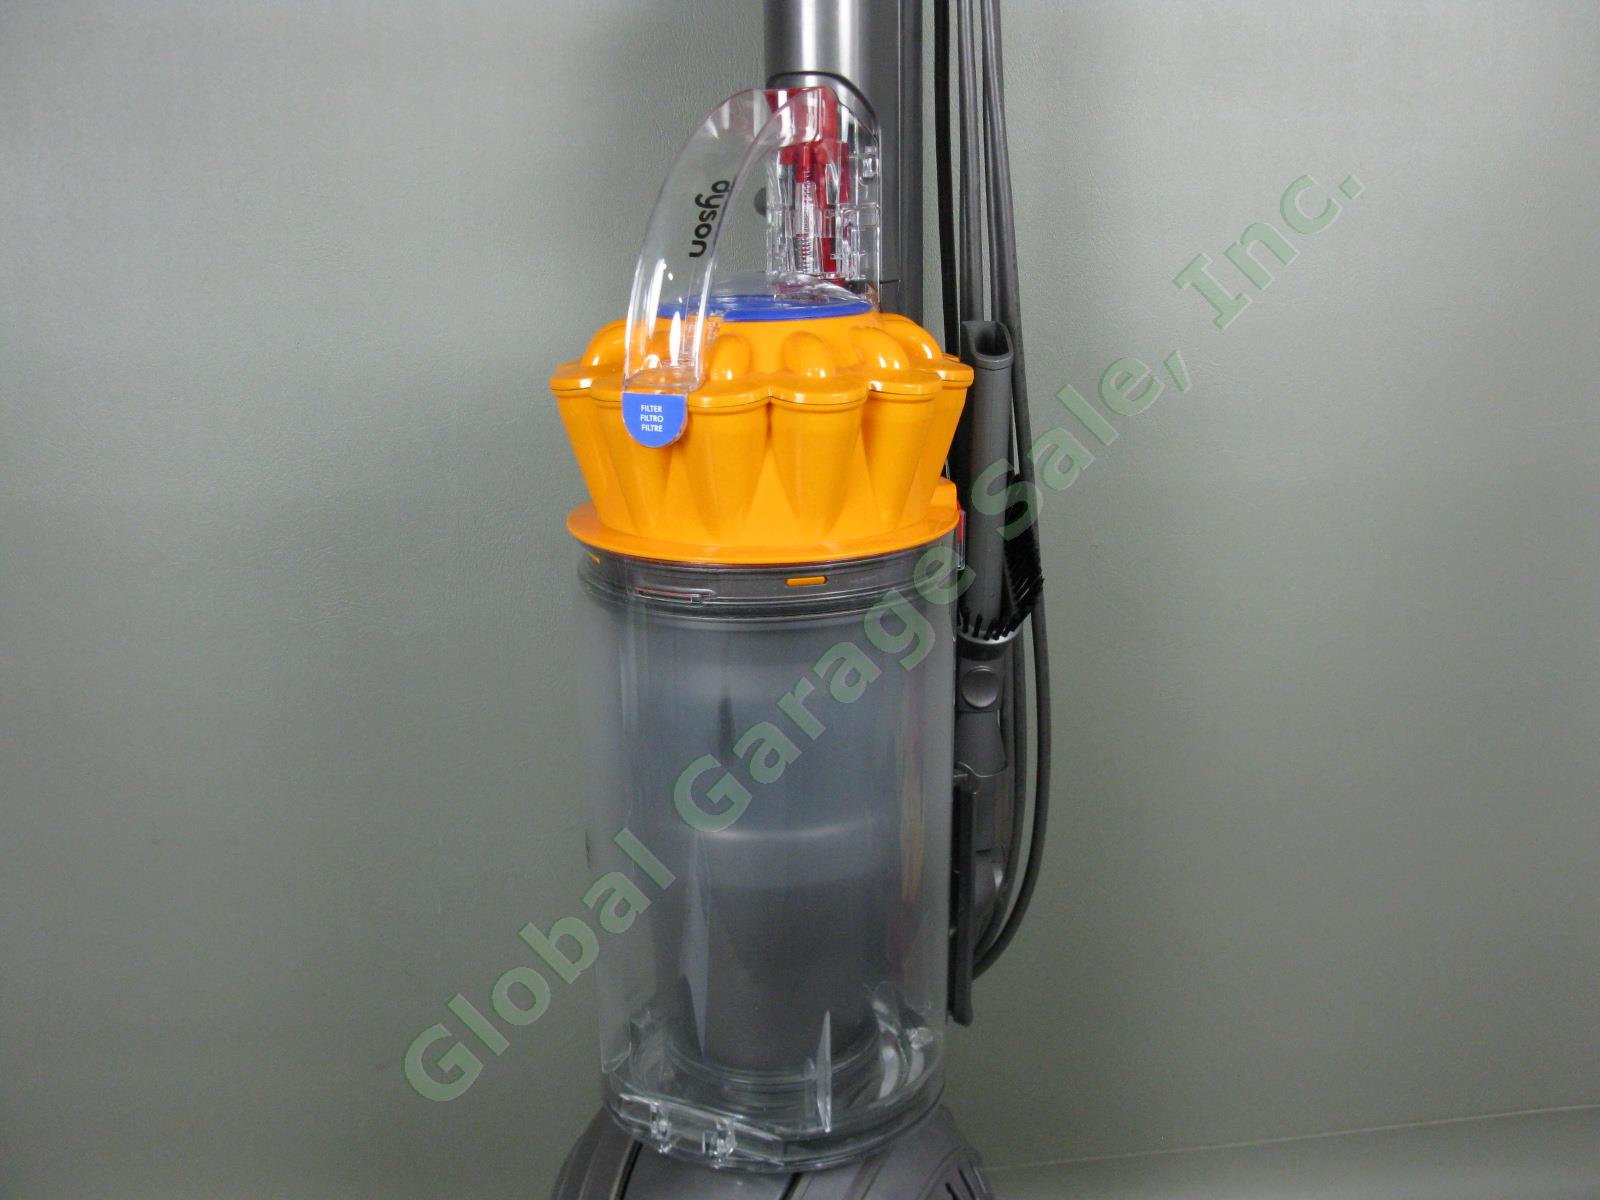 Dyson UP13 Multi Floor Ball Bagless Upright Vacuum Cleaner W/ Manual $400 Retail 2